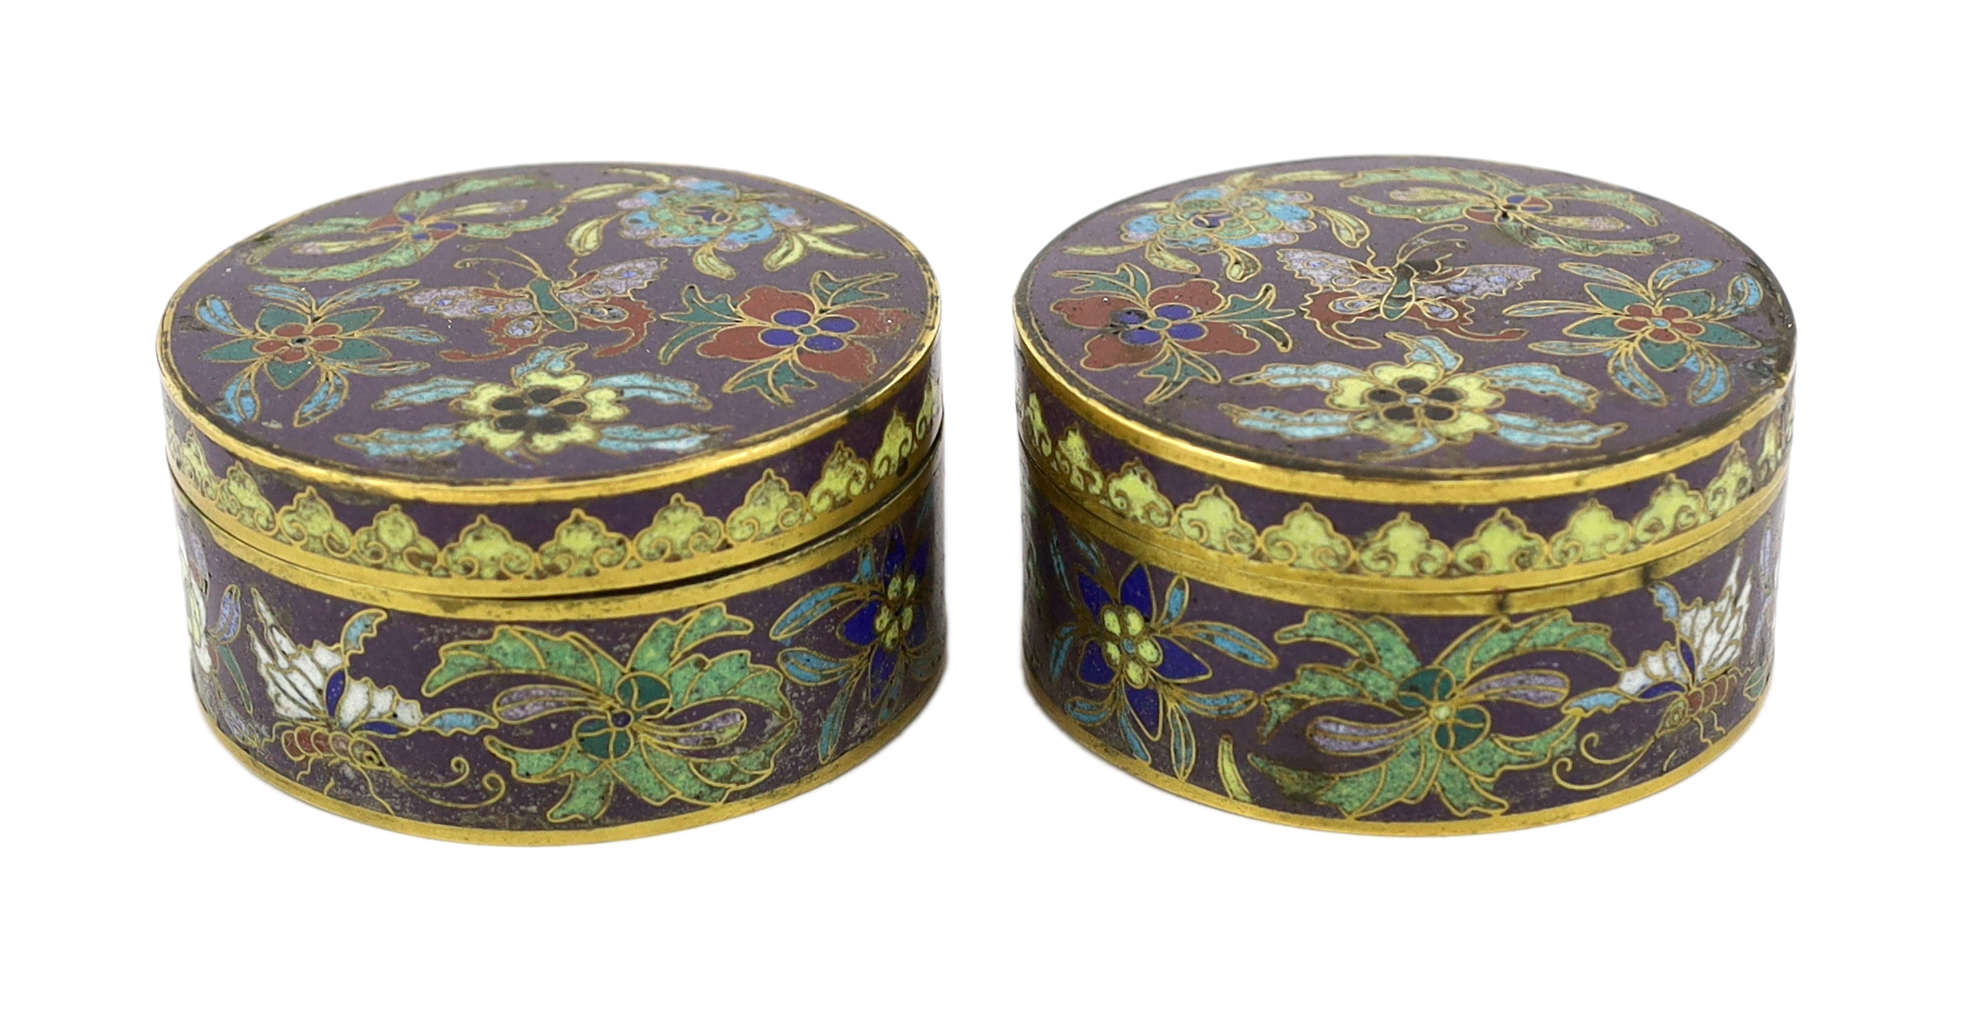 A pair of Chinese purple ground cloisonné enamel circular boxes and covers, 19th century, small losses enamel